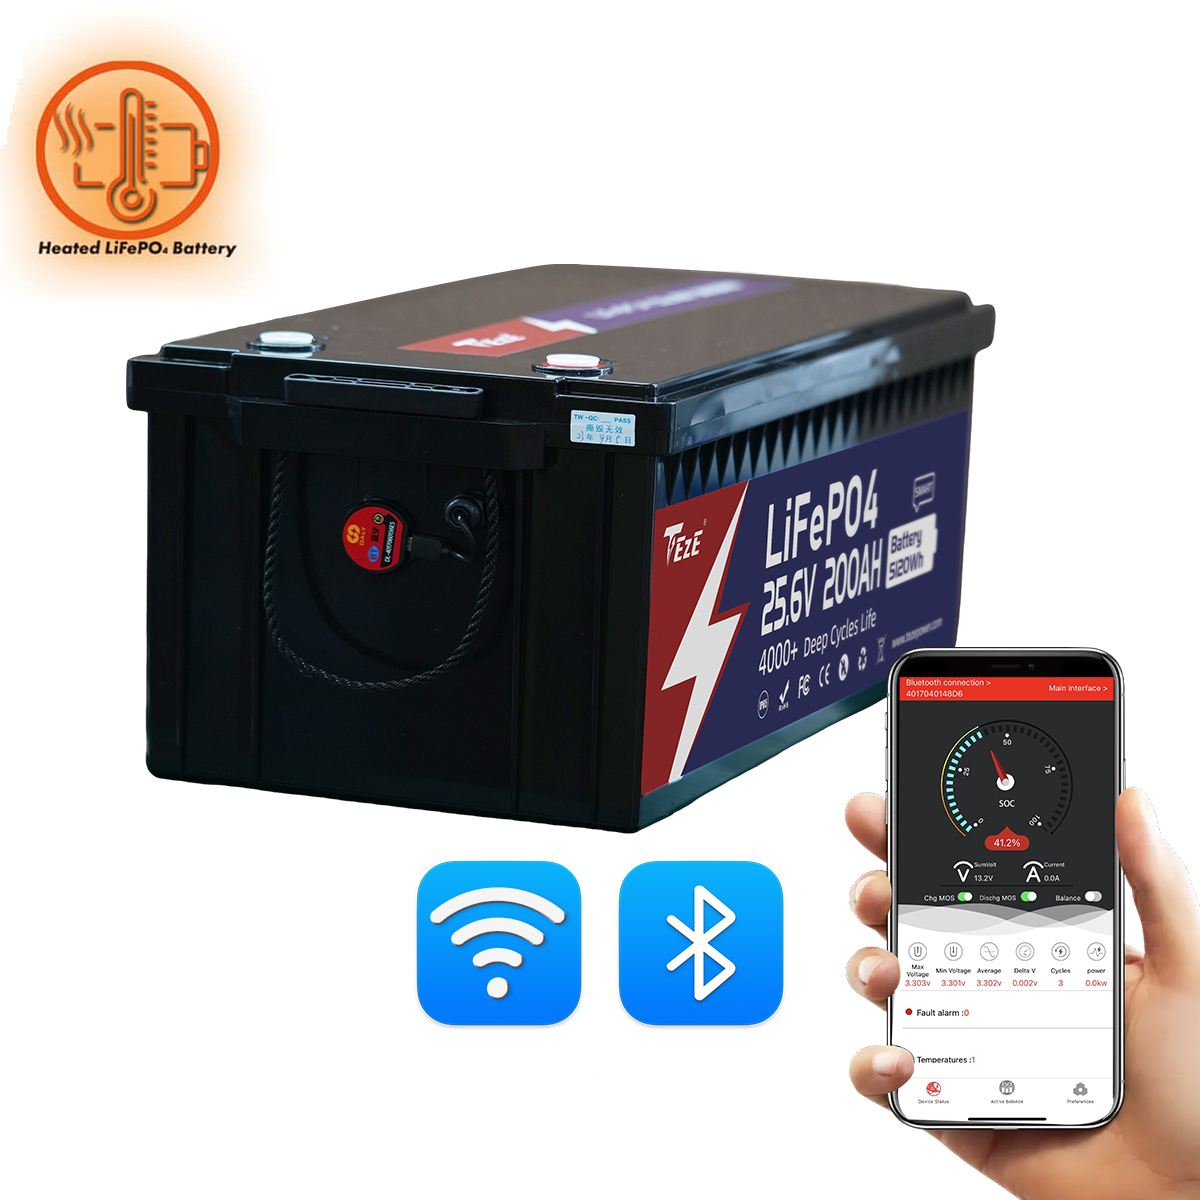 TezePower 24V 200Ah LiFePO4 Battery with WiFi and Bluetooth, RS485/RS232/CAN Communication Ports, Self-heating and Active Balancer, Built-in 200A Daly BMS(WiFi External Version)-TezePower